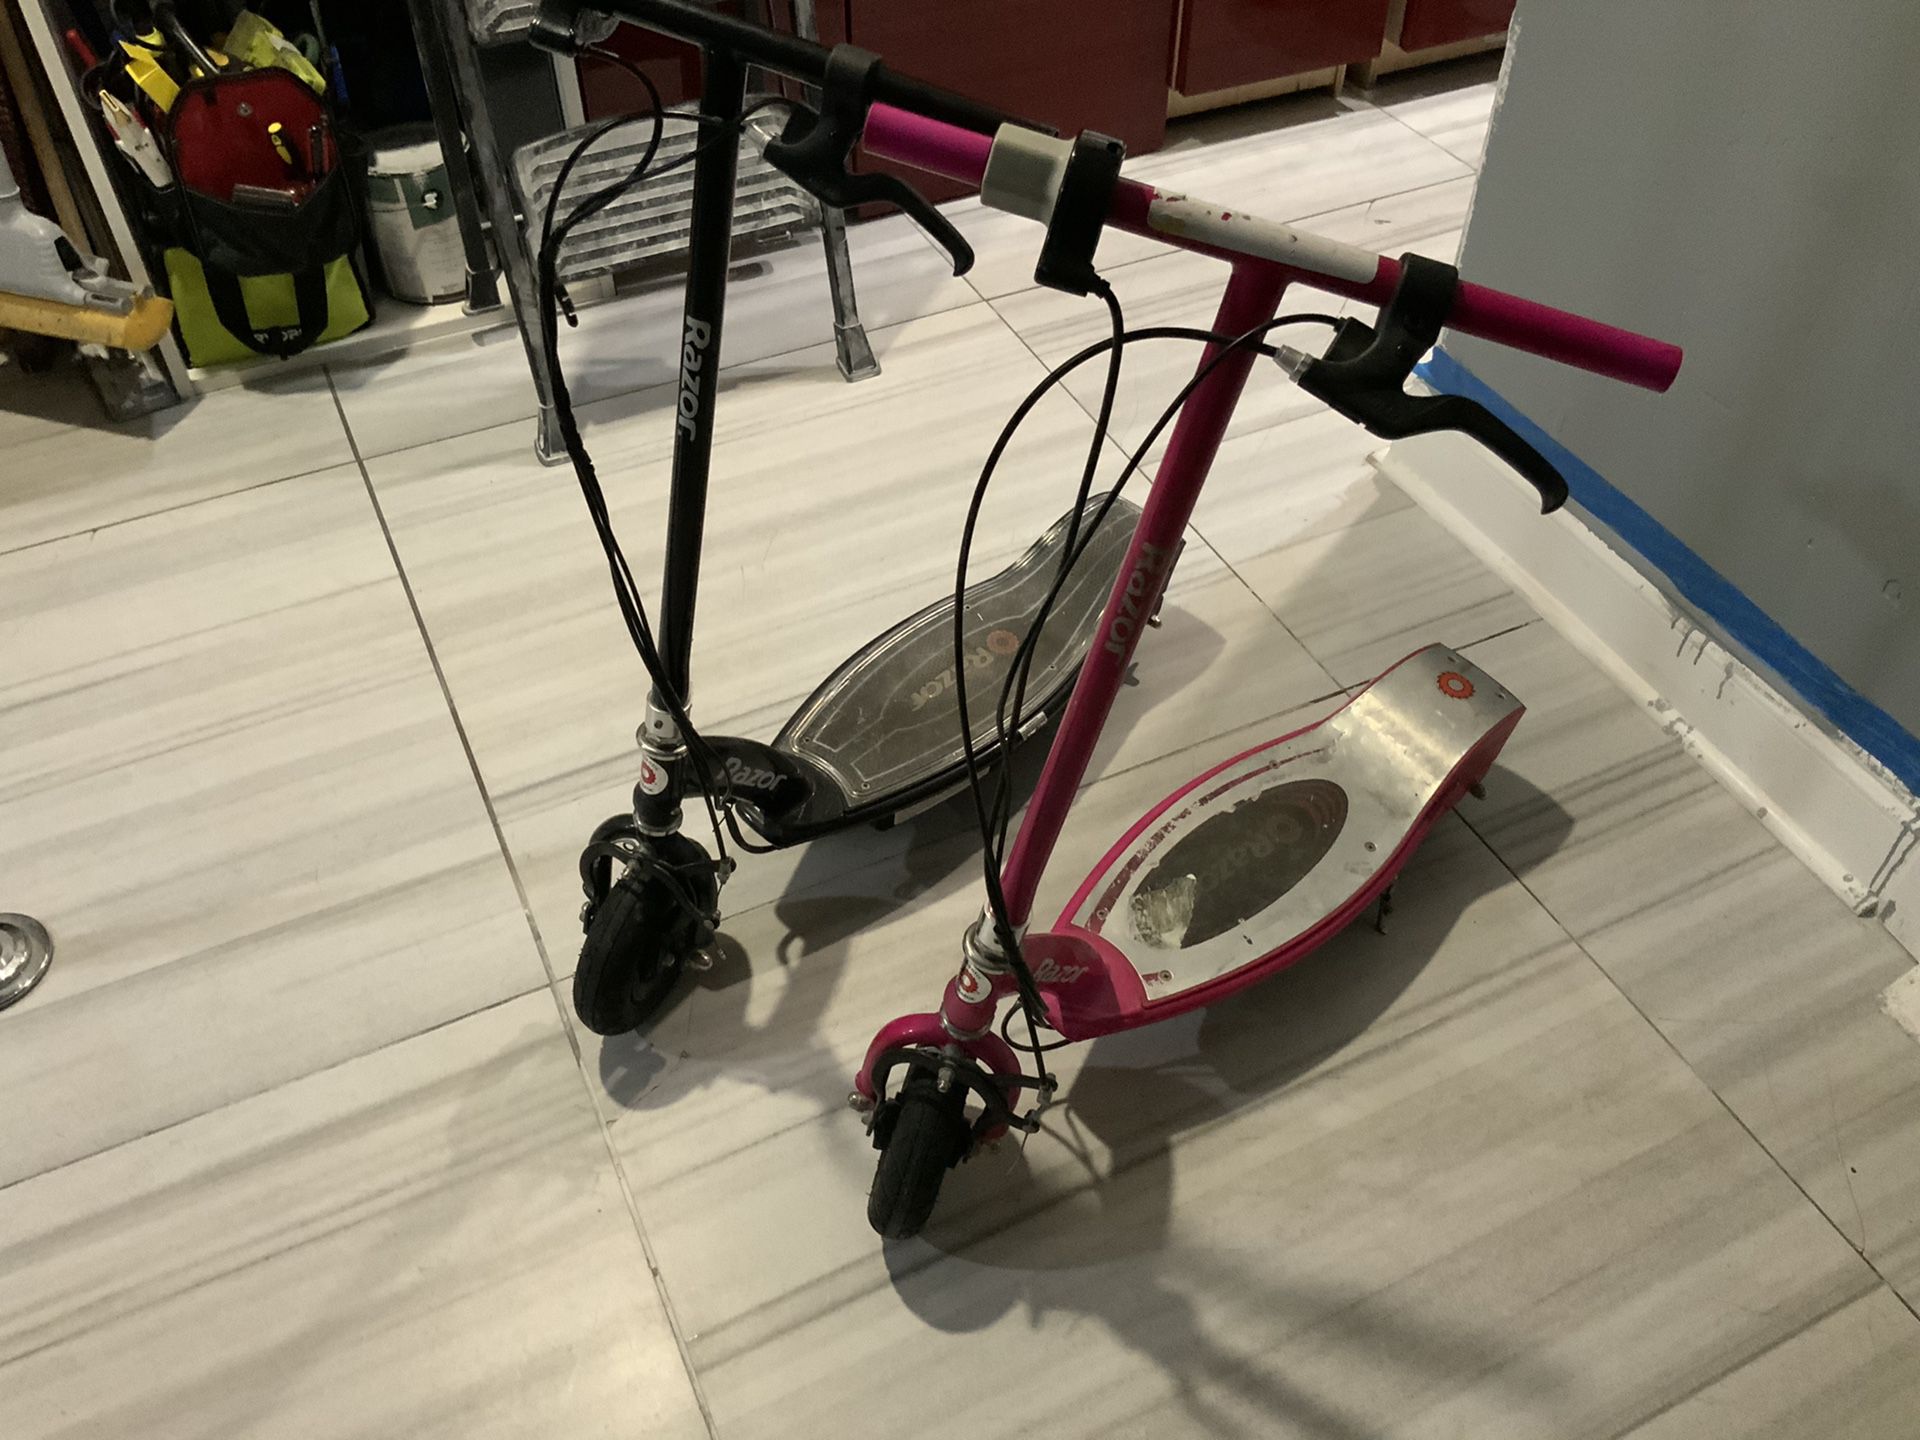 Scooter for kids - only one charger